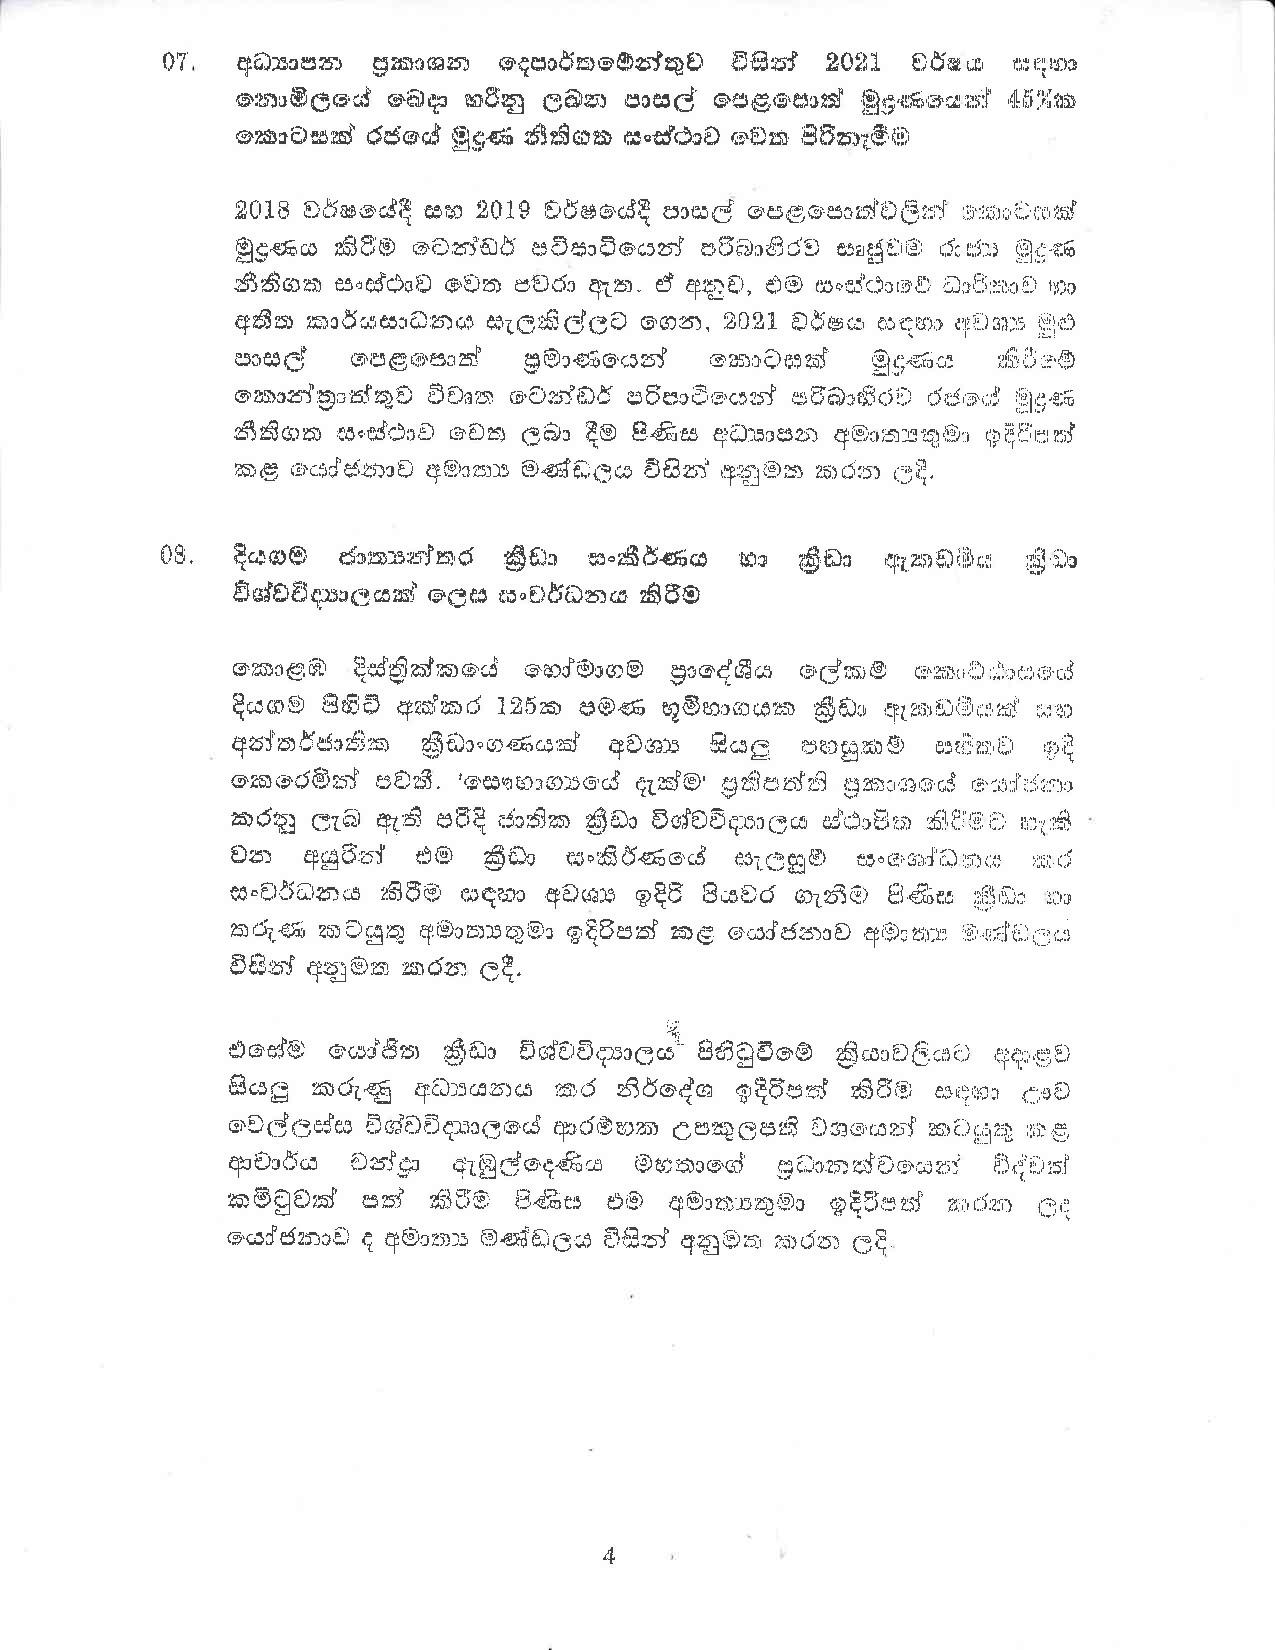 Cabinet Decision on sinhala 18.03.2020 page 004